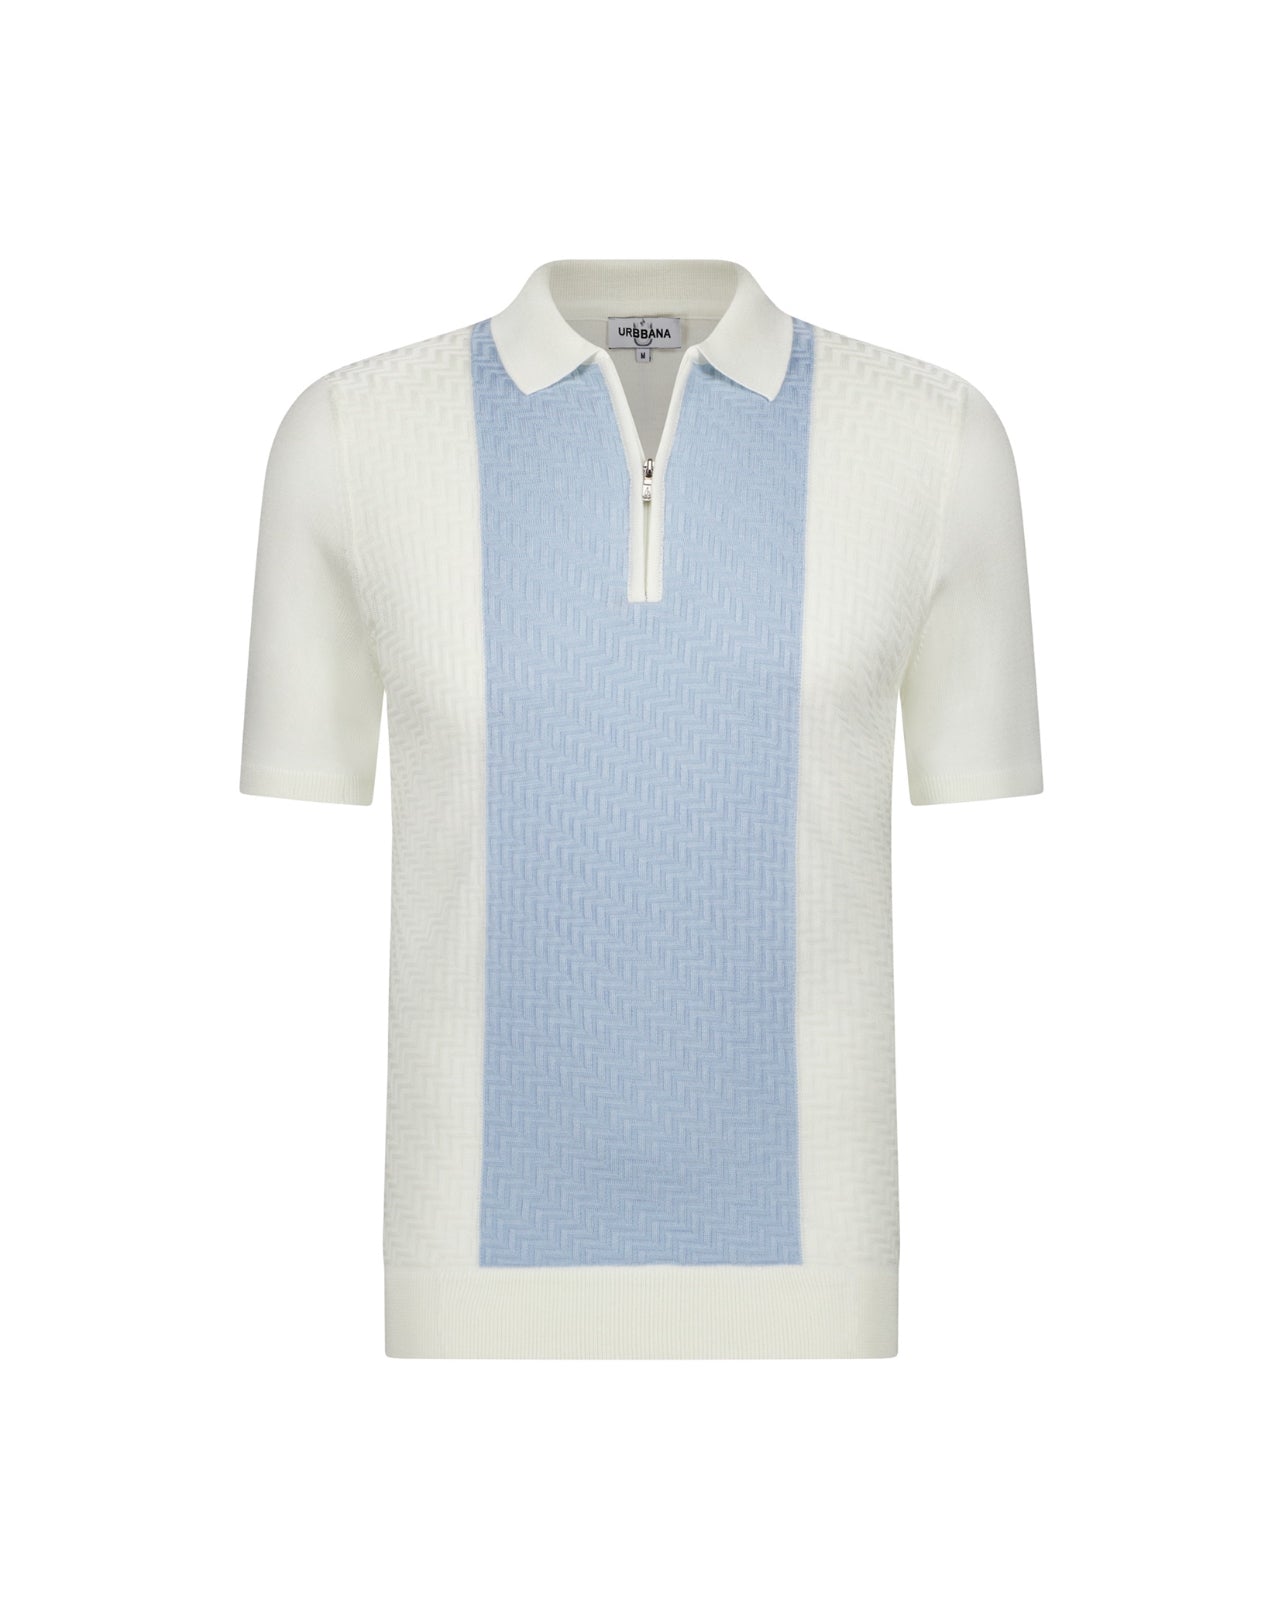 The Bodrum Knitted Polo Shirt - Blue